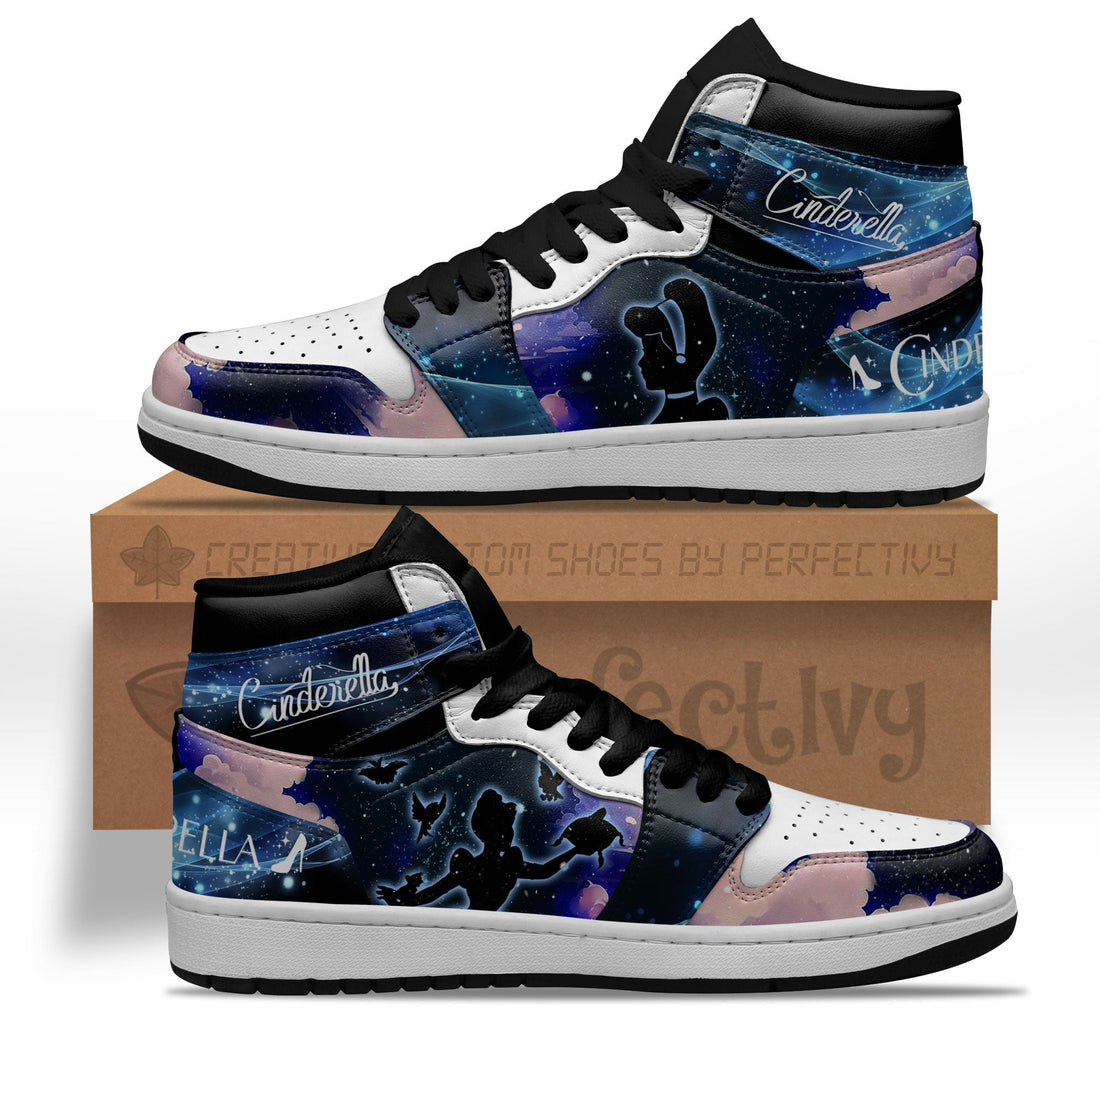 Cinderella Silhouette J1 Shoes Custom For Fans Sneakers PT10-Gear Wanta